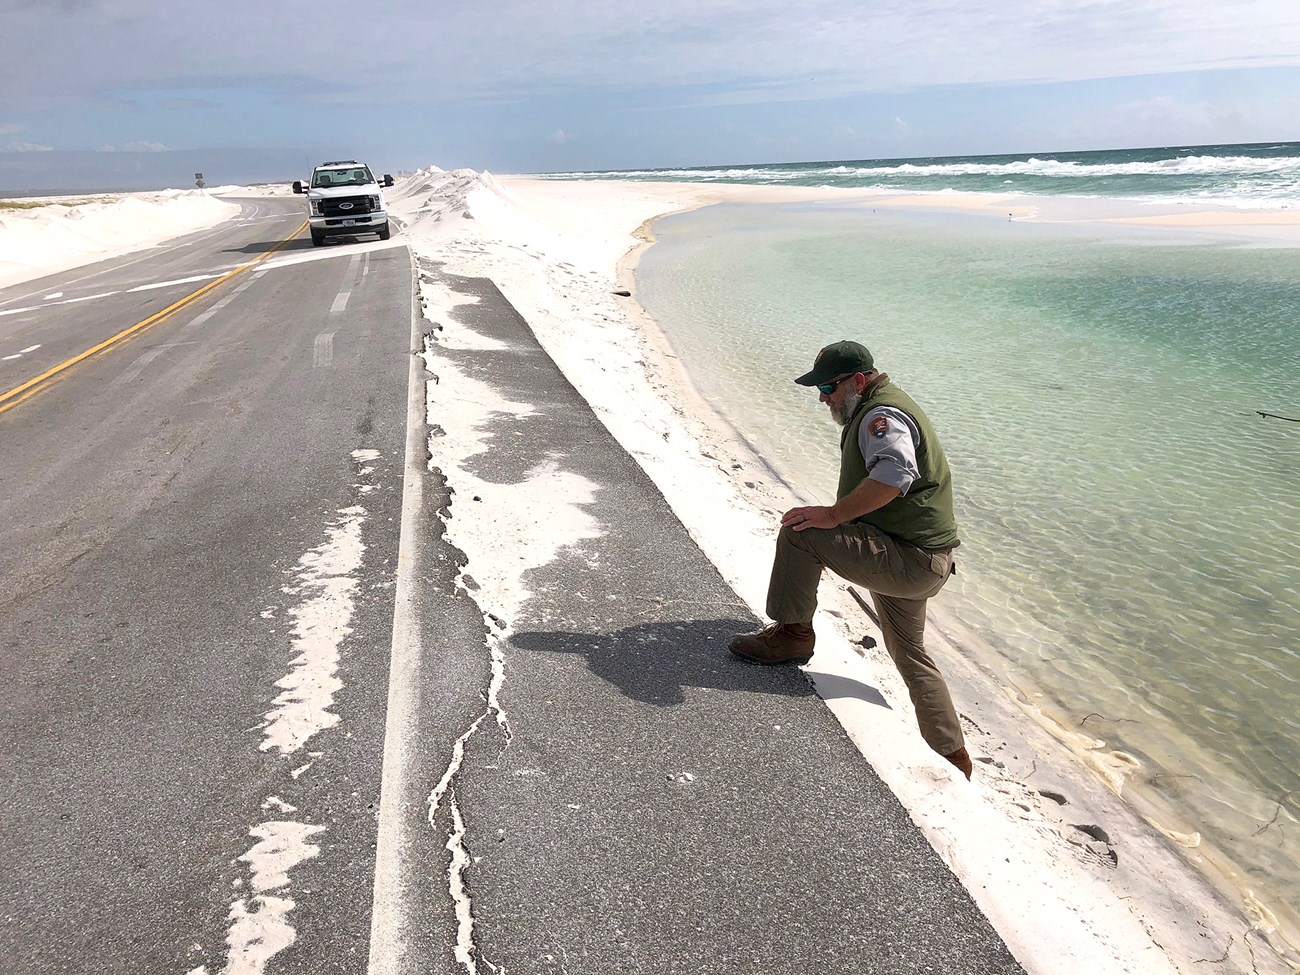 Man in NPS uniform stands with his foot on the edge of a sand-covered road next to the ocean. A truck is in the background.